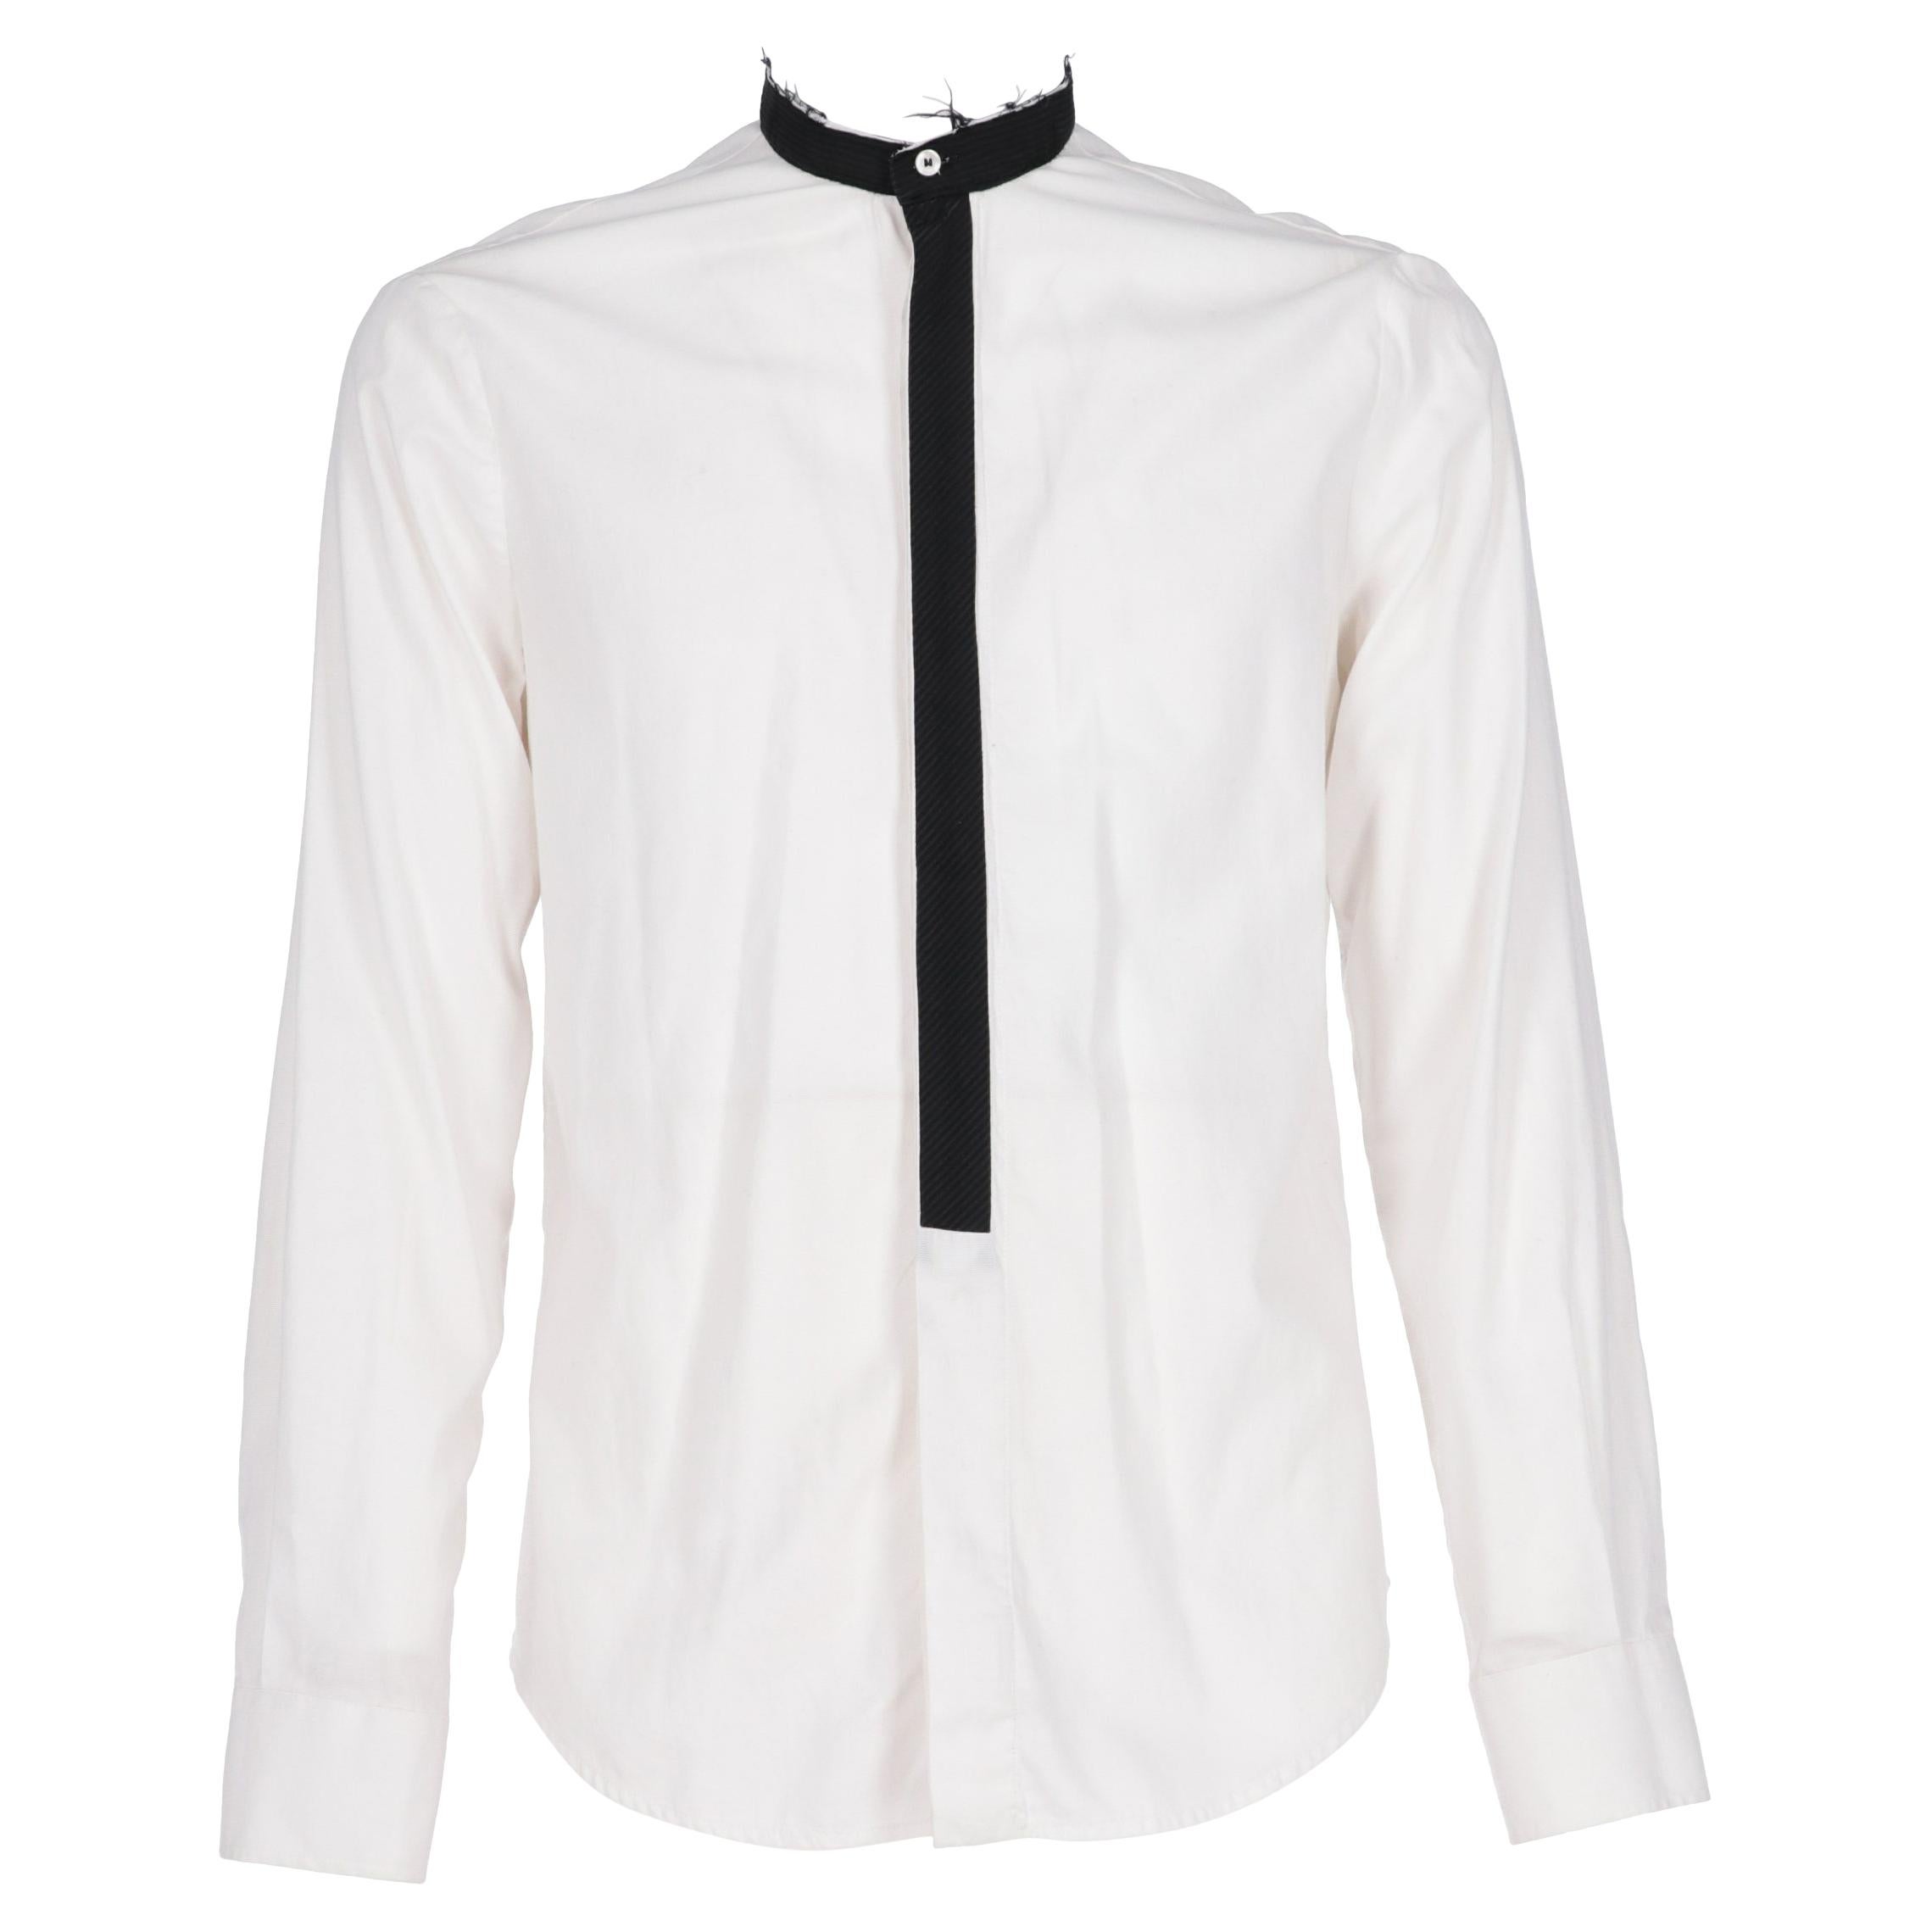 2000s Just Cavalli Two-Tone Shirt